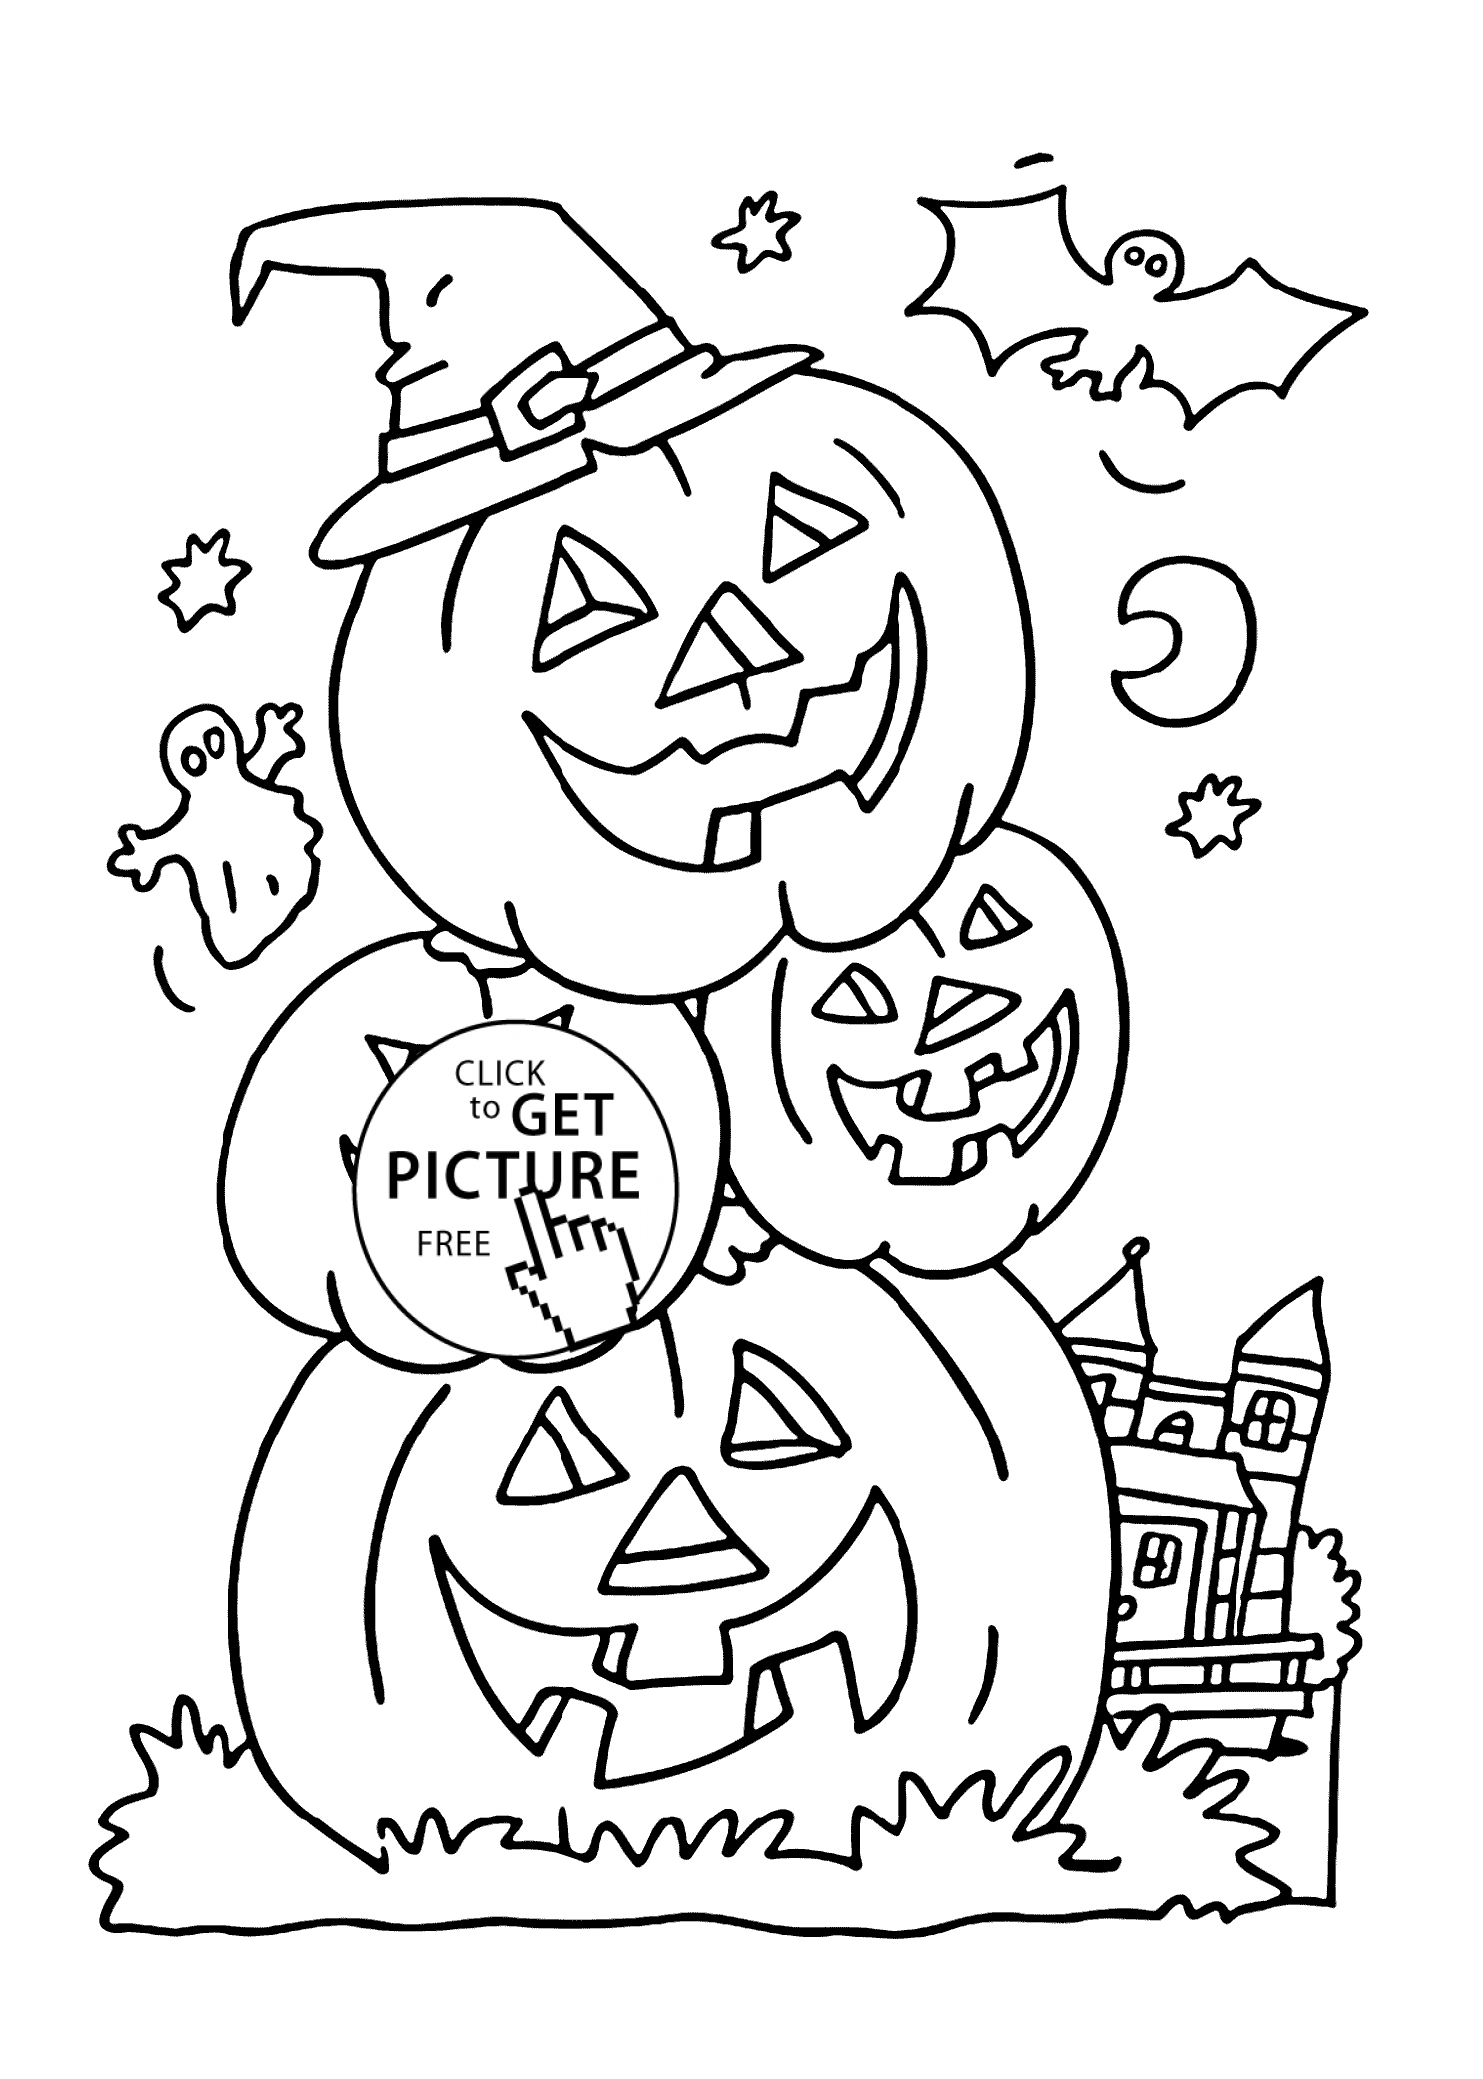 Coloring Page Of Pumpkin Halloween Pumpkins Coloring Page For Kids Printable Free